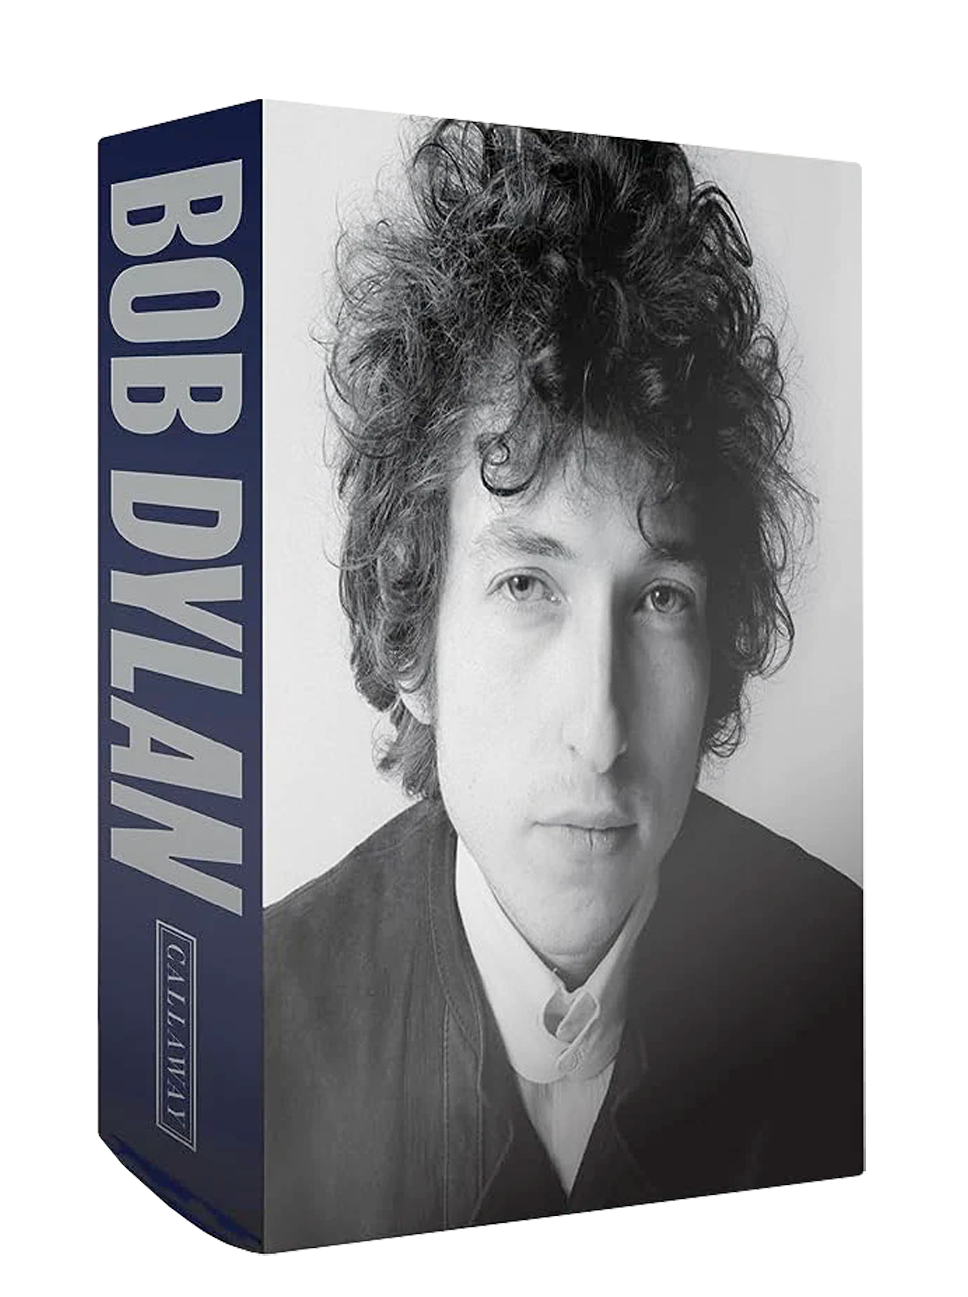 Life is about creating yourself': on Bob Dylan: Mixing Up the Medicine, Books